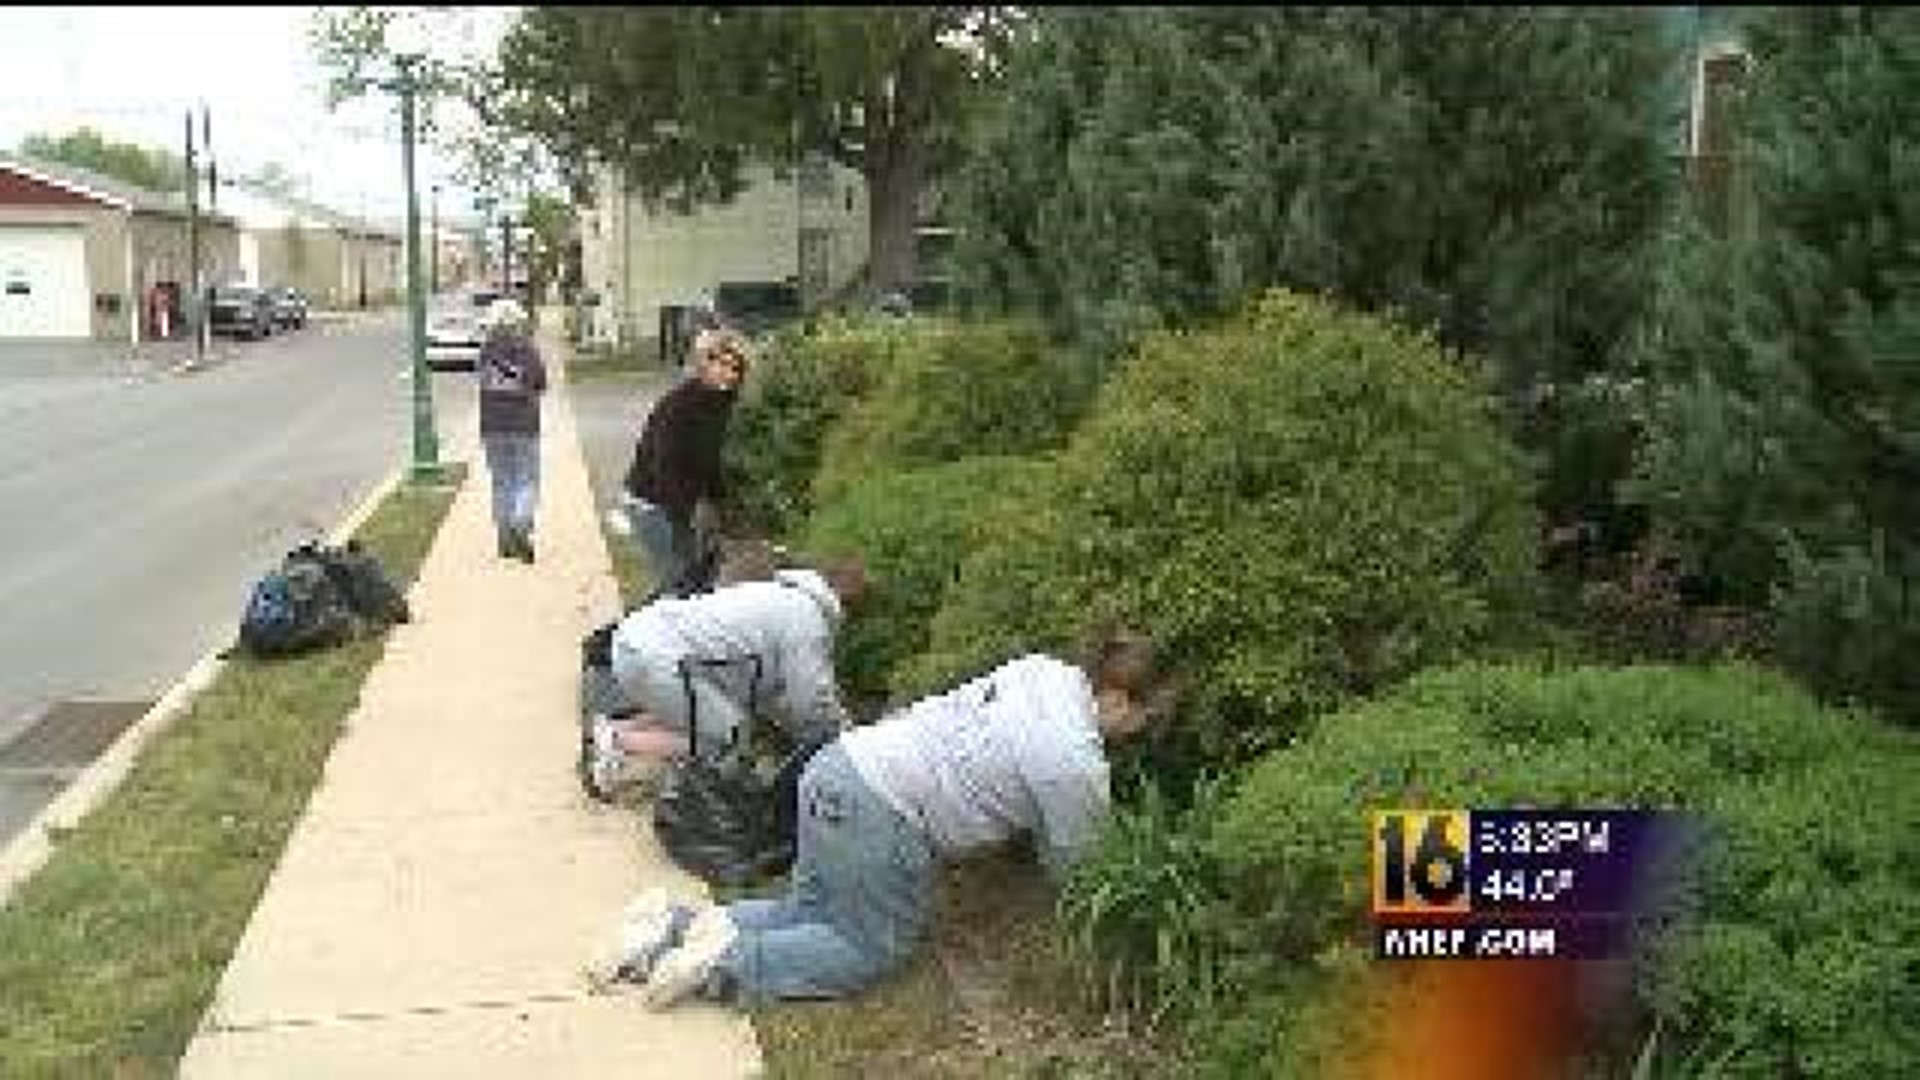 Volunteers Help Community During Day of Action